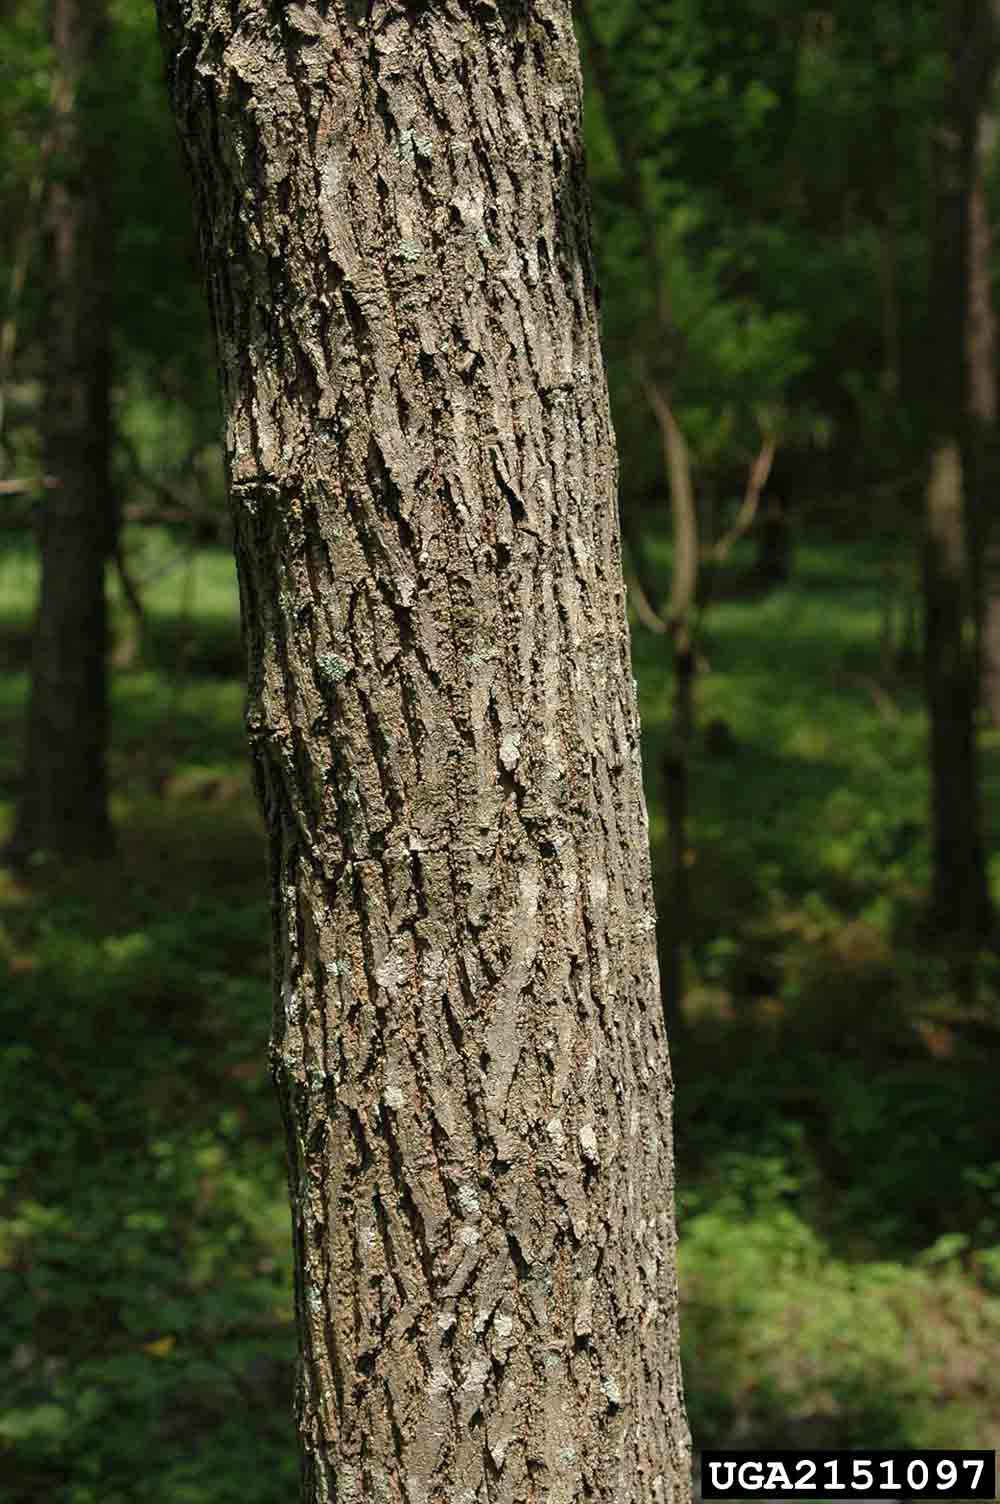 Chinese tallowtree bark on trunk